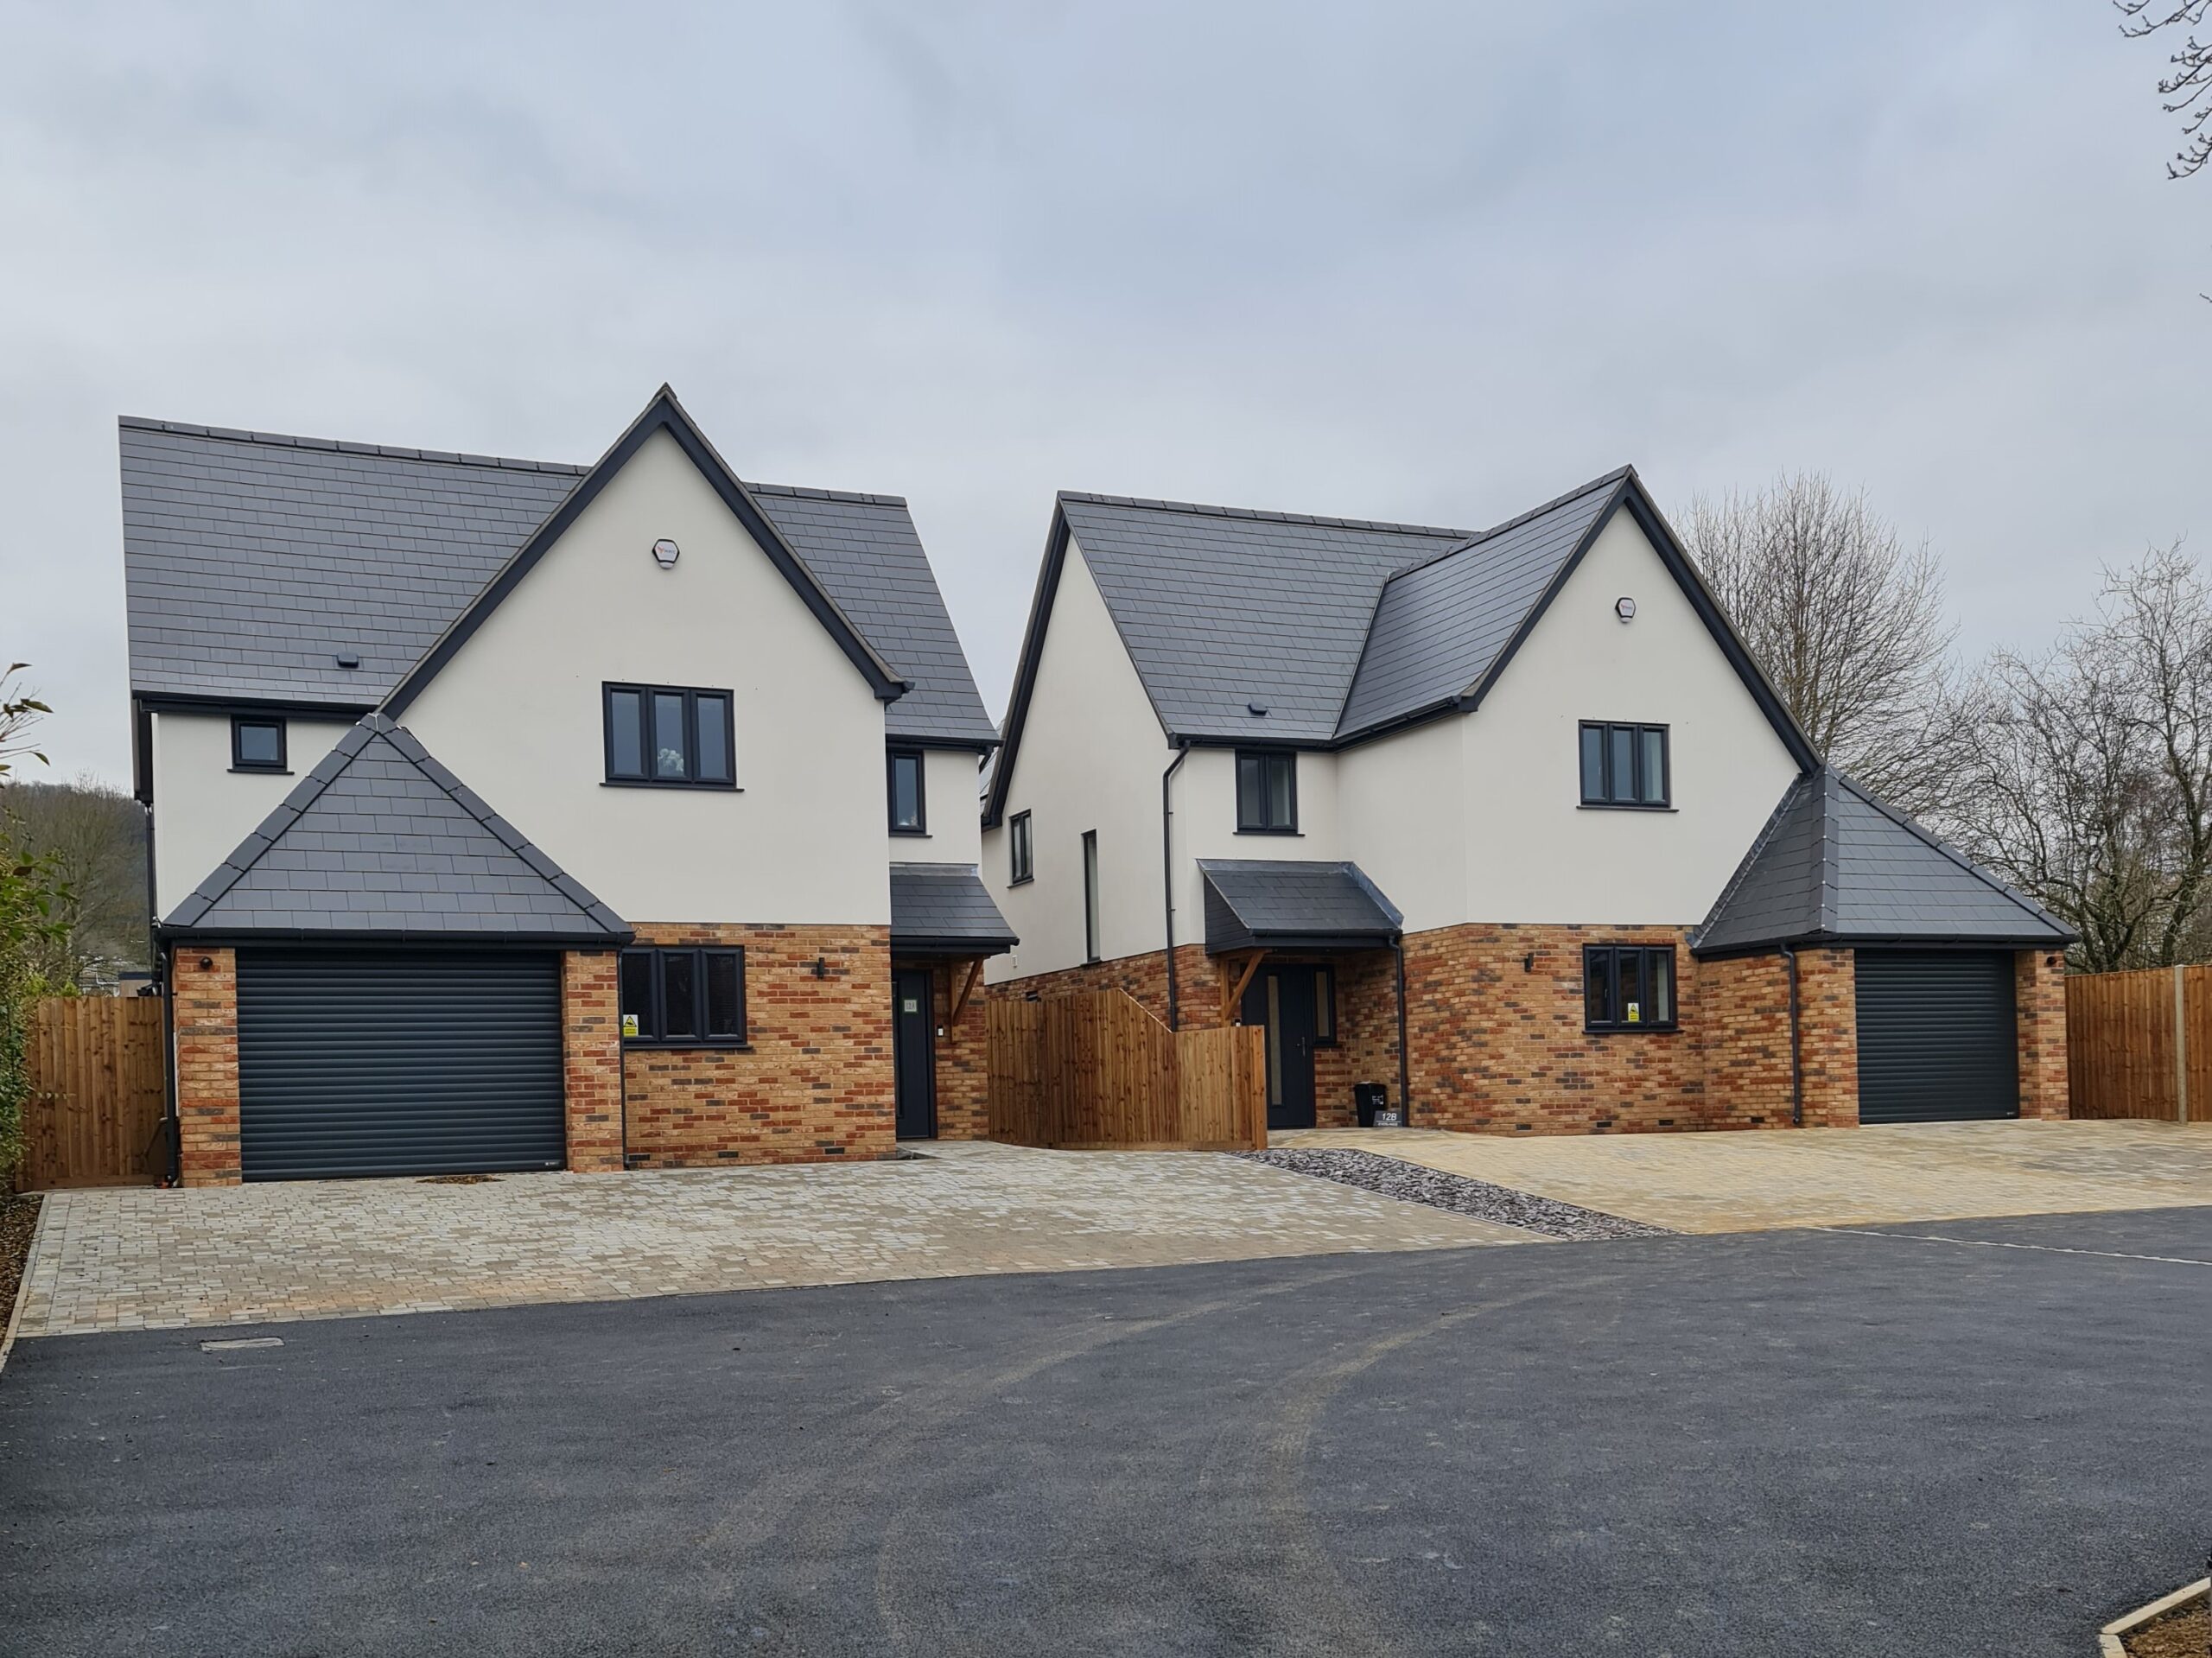 Two Orchard Homes Glos new build homes - sold